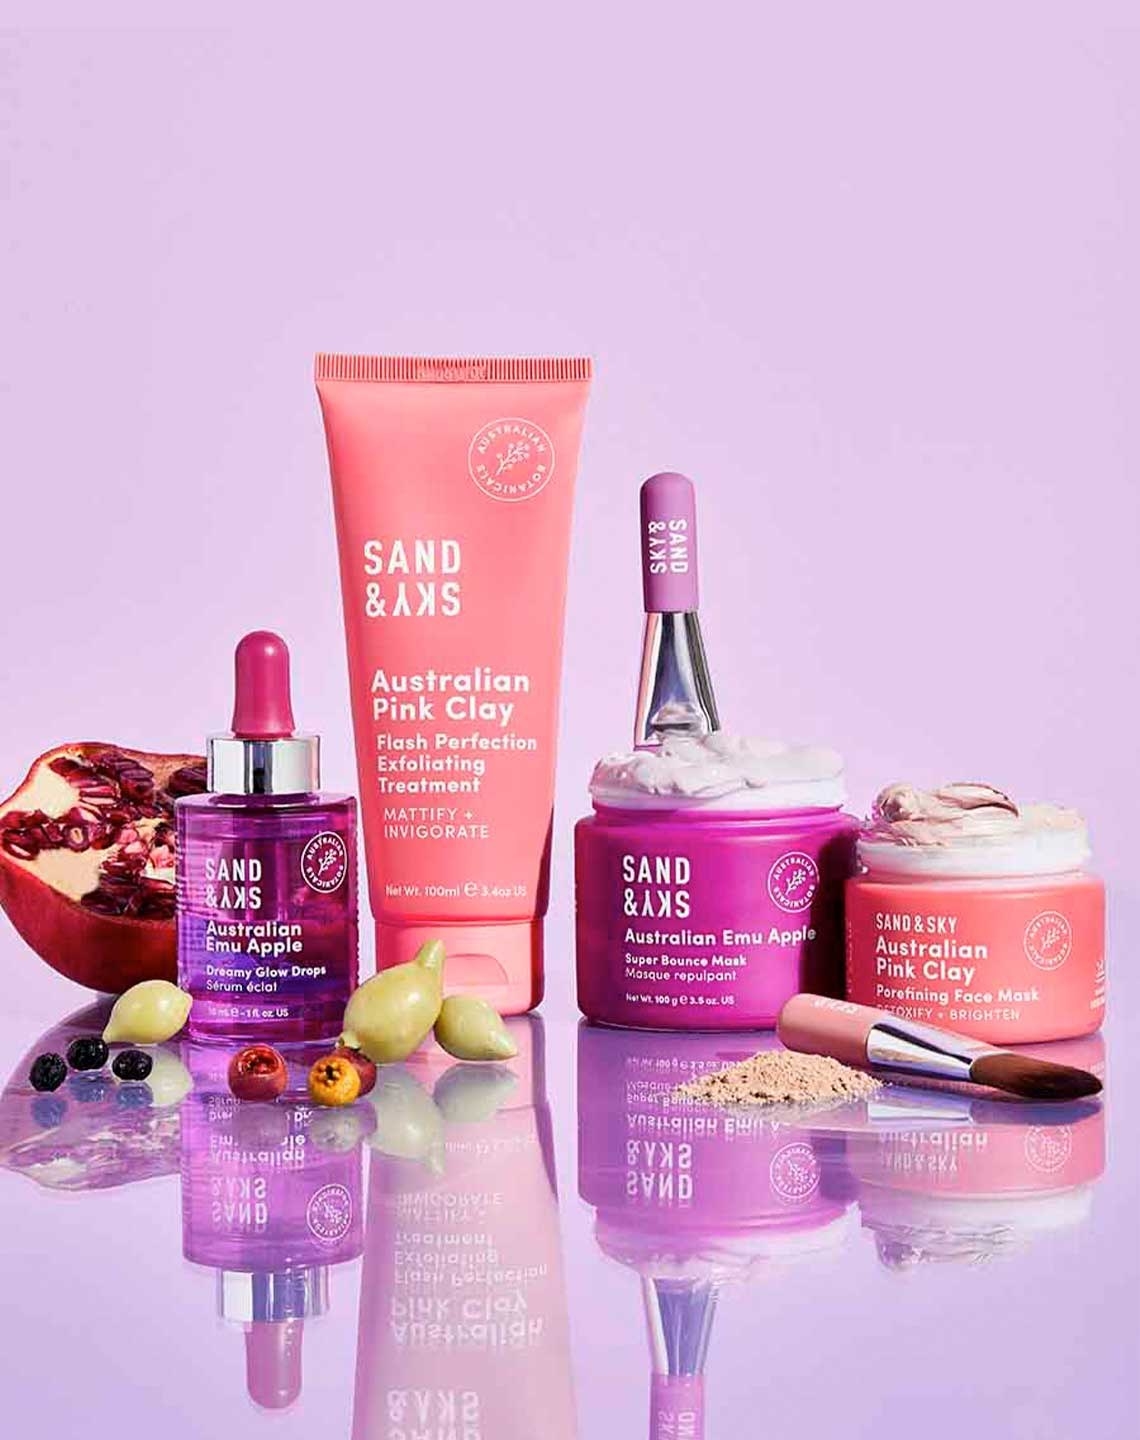 A pomegranate and other yellow and pink fruits with a jar of purple liquid, a tube of pink products, a purple tub with an applicator and a pink tub